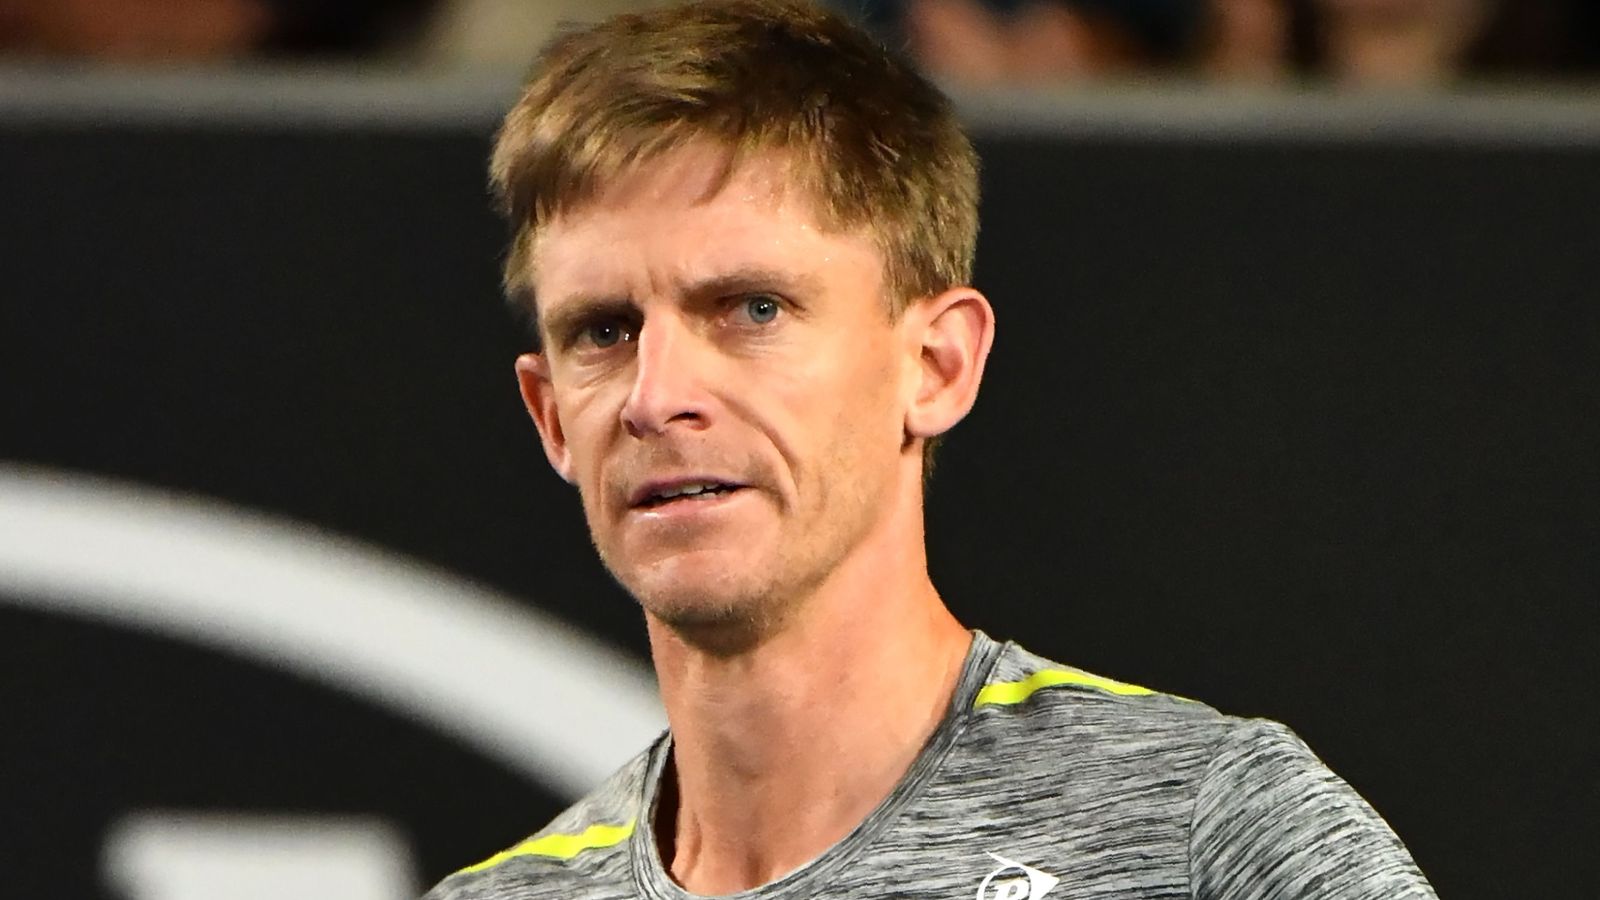 Kevin Anderson says he's 'feeling inspired' after time off due to coronavirus pandemic | Tennis ...